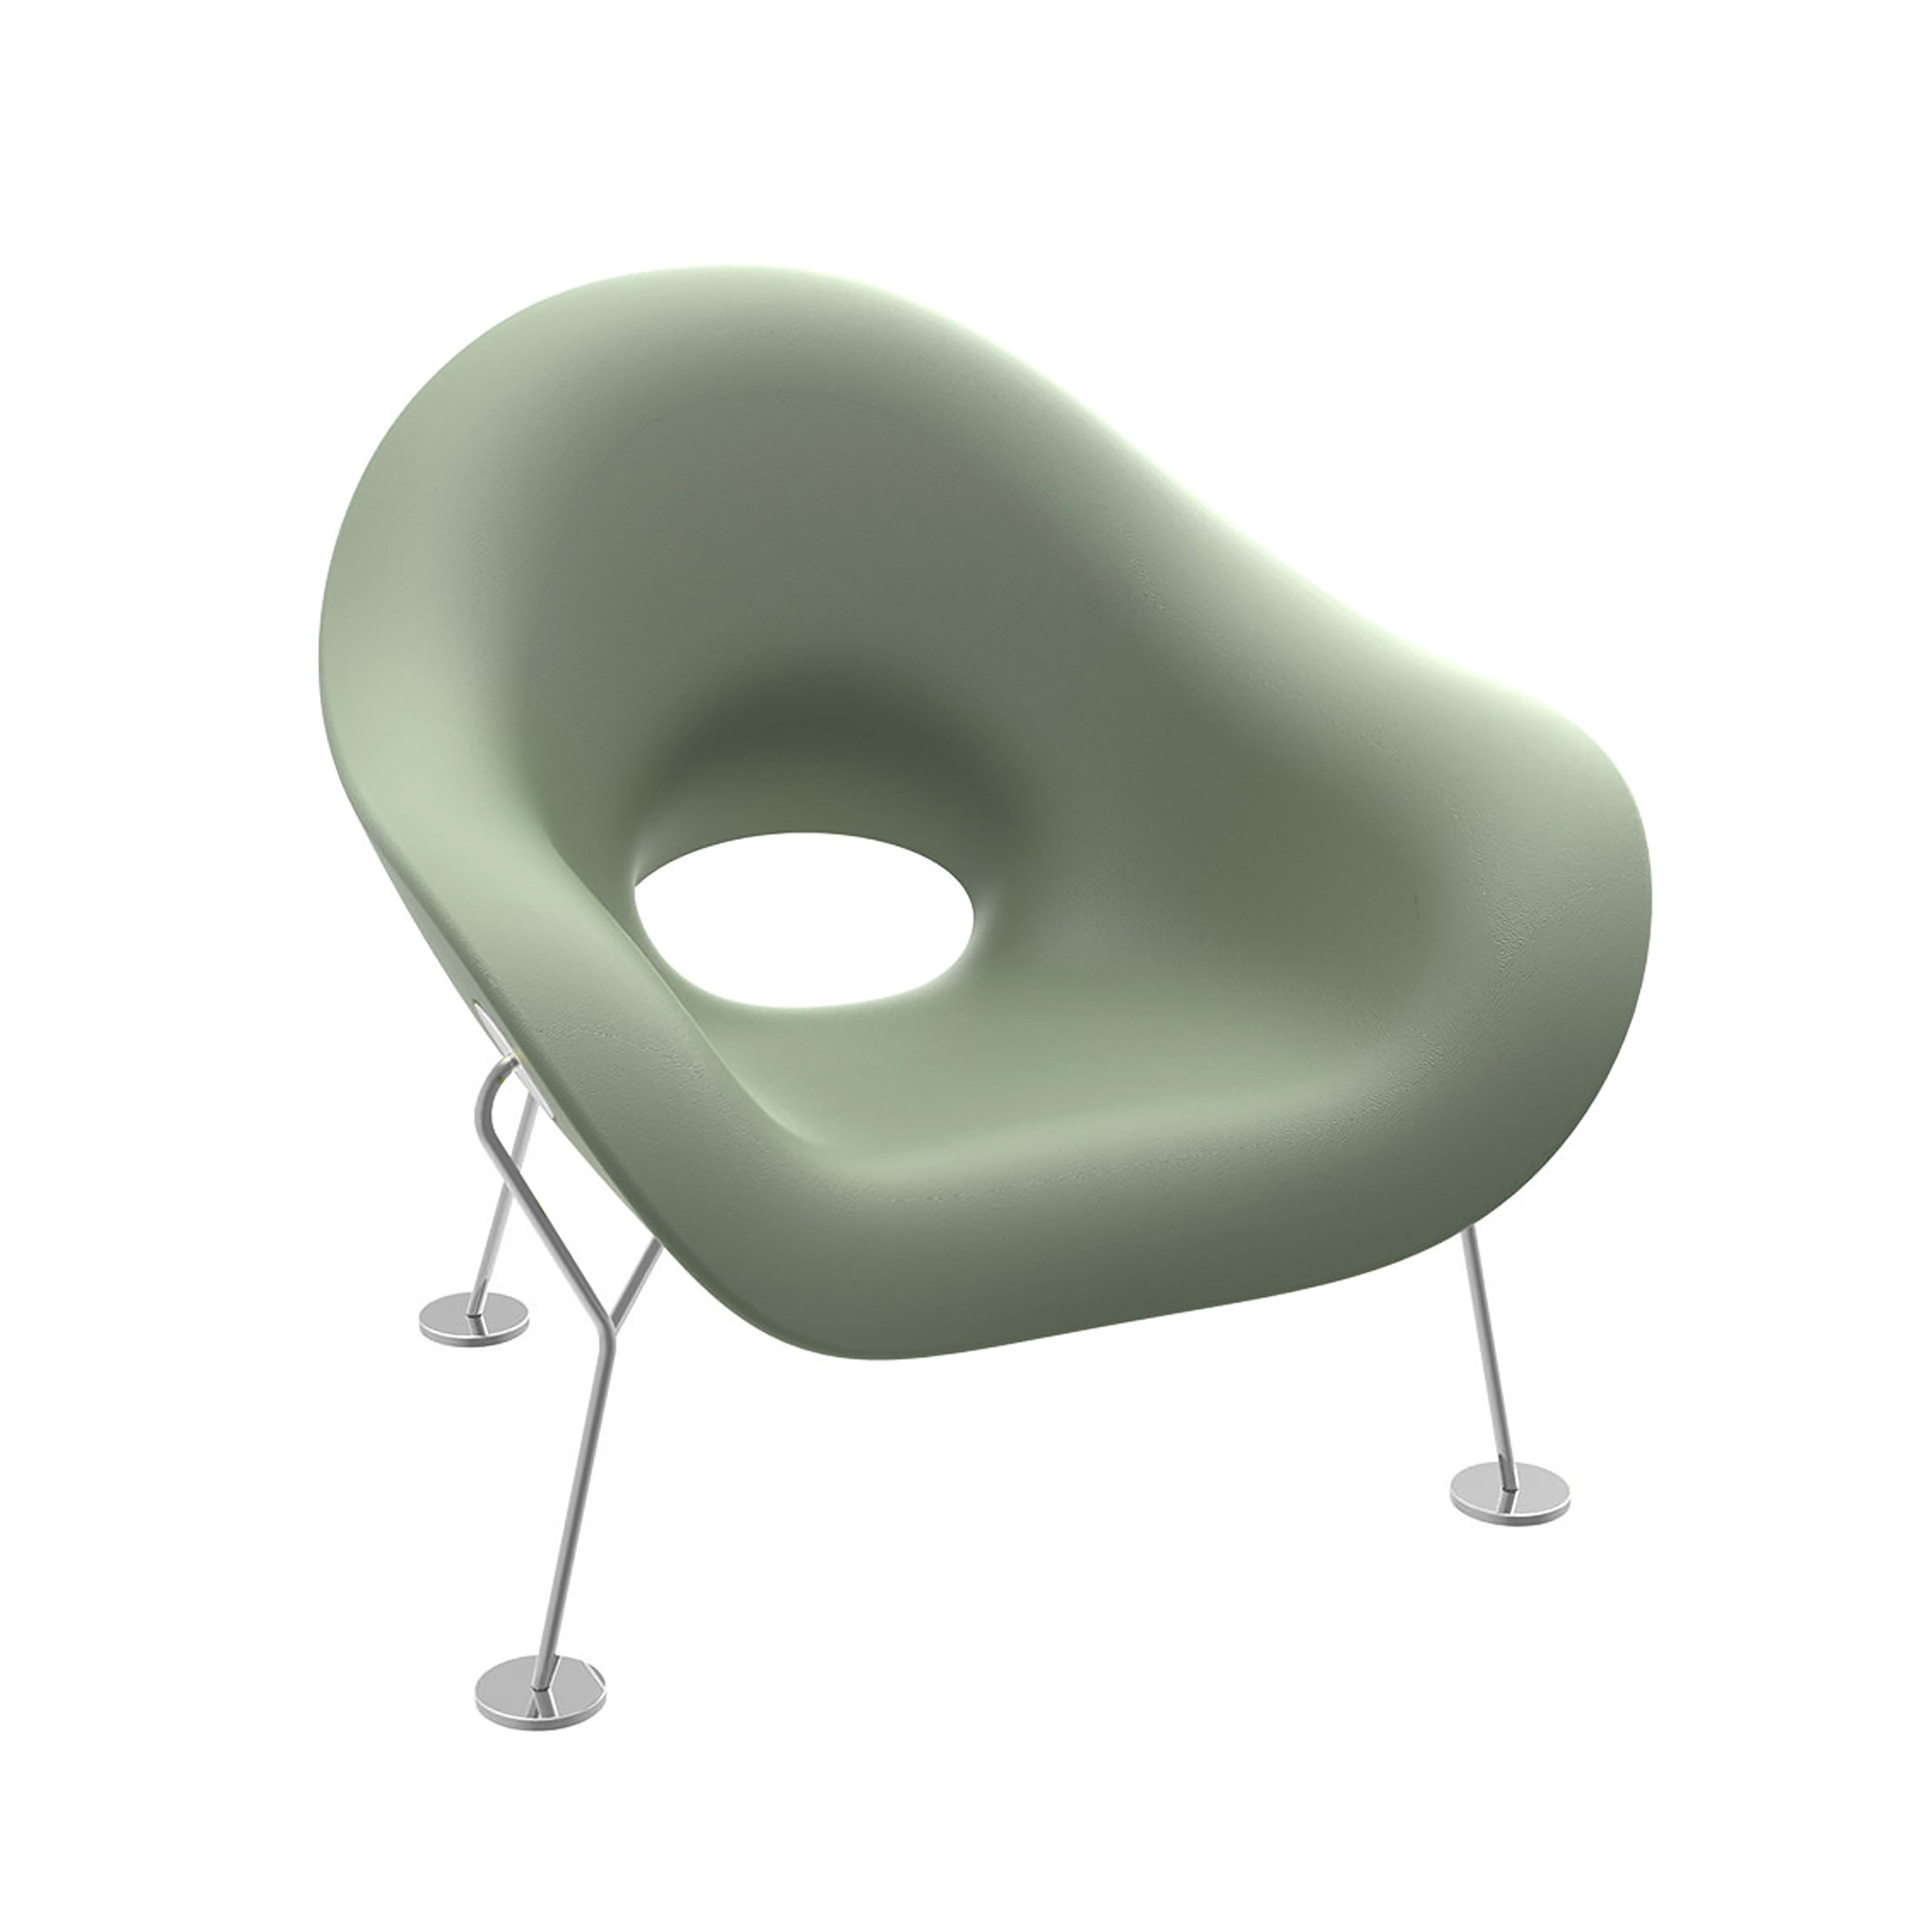 For Sale: Green (Balsam Green) Plush Modern Black Side or Arm Chair with Chrome Legs by Andrea Branzi 2